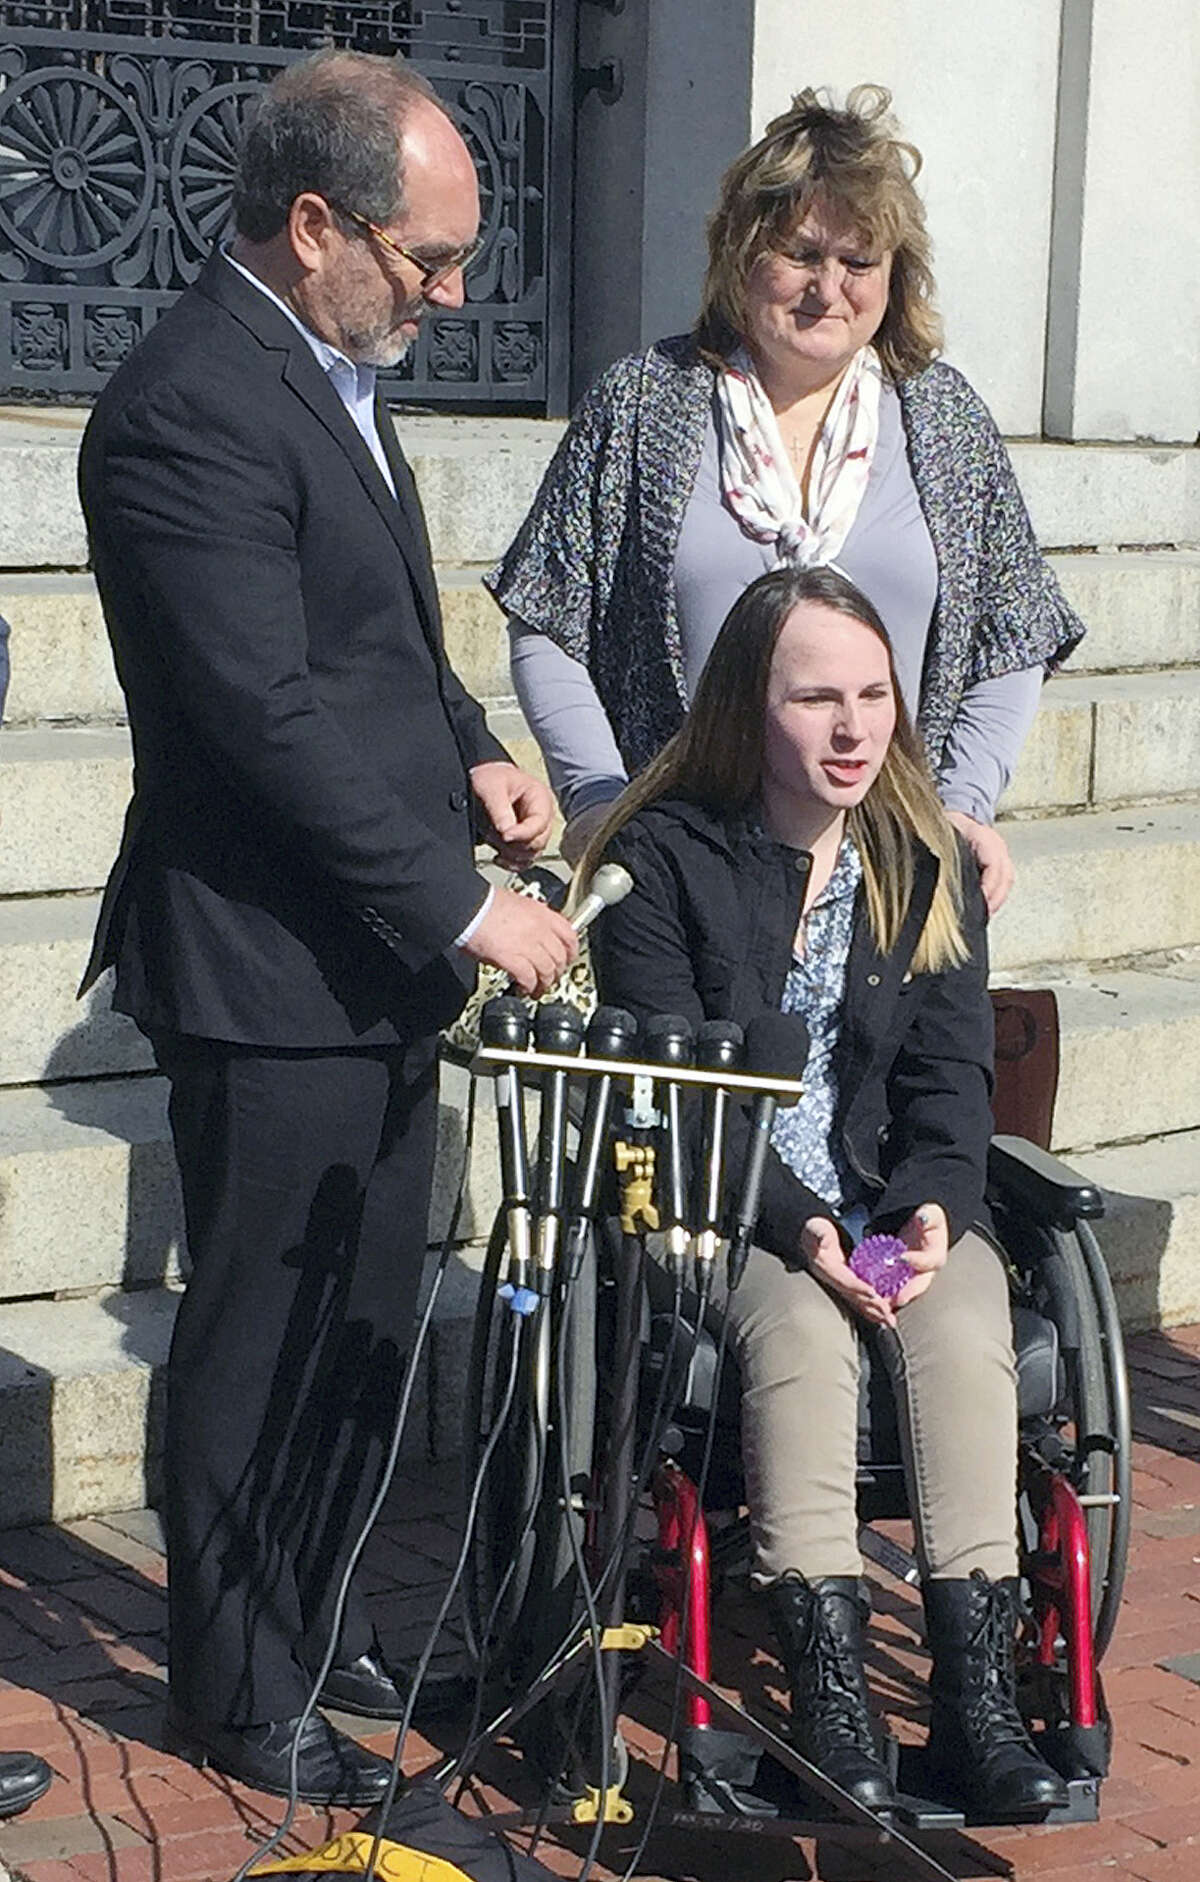 Justina Pelletier, seated, speaks to media alongside the Rev. Patrick Mahoney, left, and her mother Linda Pelletier on Thursday, Feb. 25, 2016, outside the Statehouse in Boston. The Pelletier’s filed a lawsuit against Children’s Hospital in Boston over a medically-related custody dispute. The case hinged on dueling diagnoses of Justina’s condition.